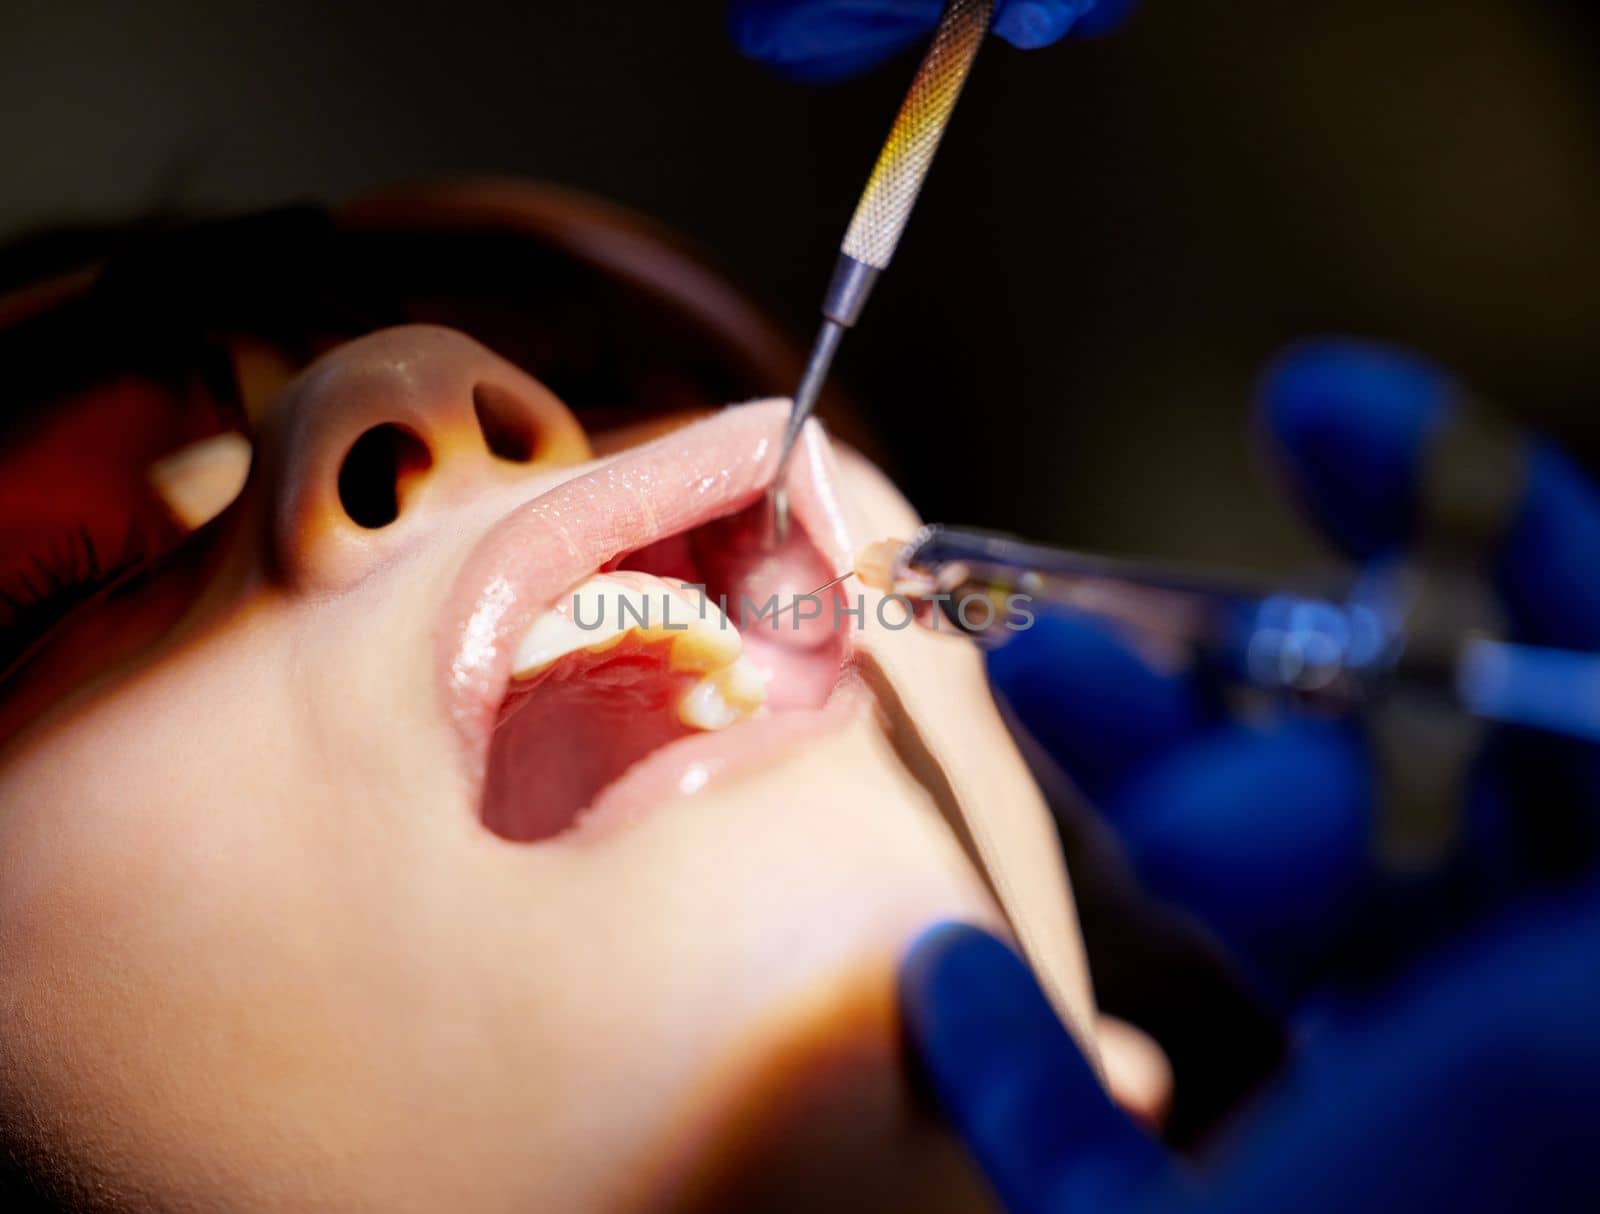 Open wide for expert dental work. a young woman having a dental procedure performed on her